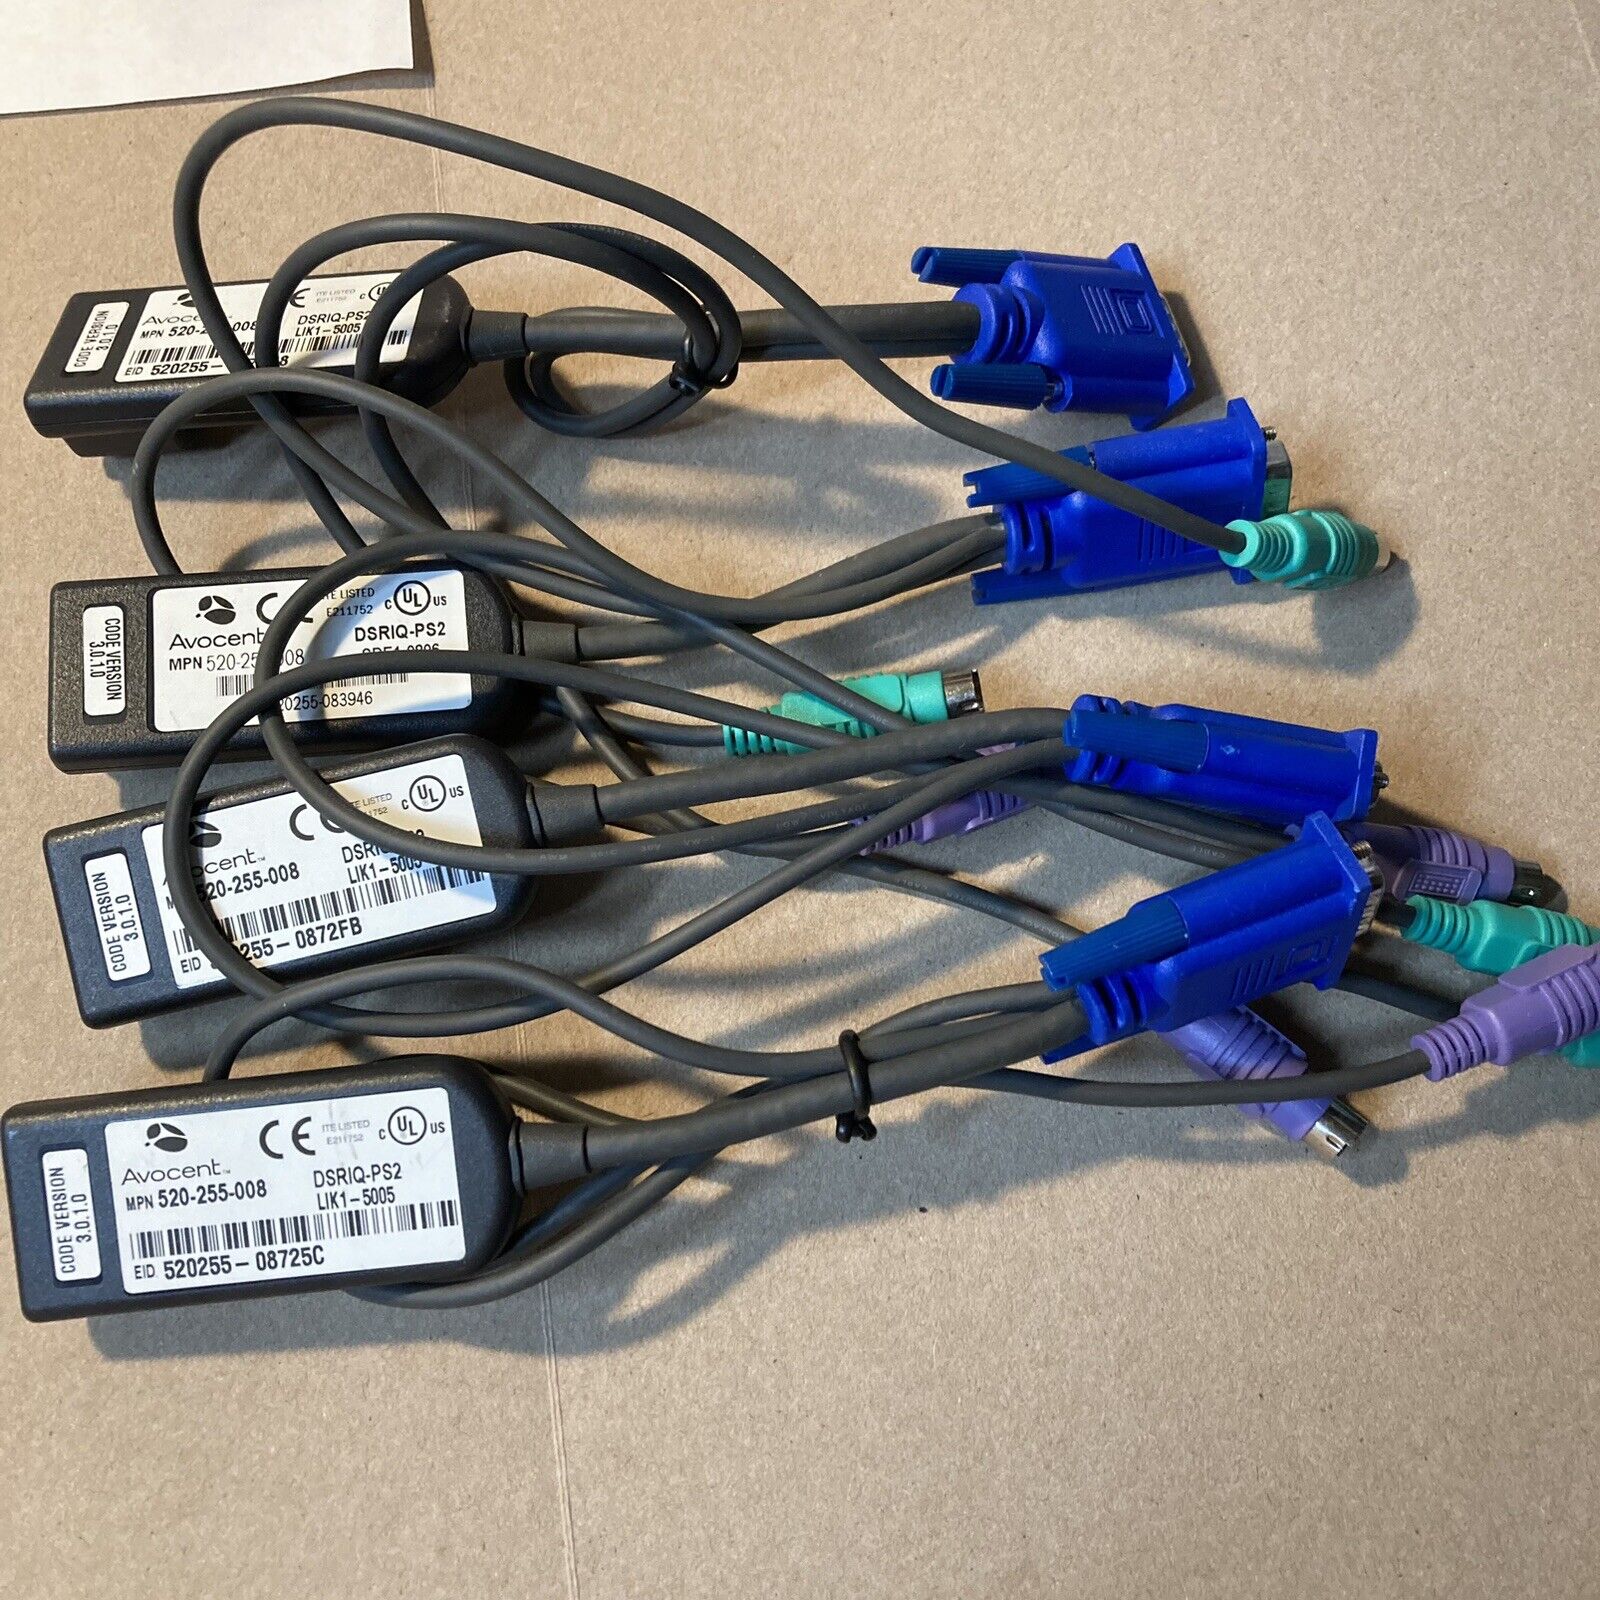 Lot of 4x Avocent DSRIQ-PS2 Avocent Server Interface Cable DSRIQ-PS2 PS/2